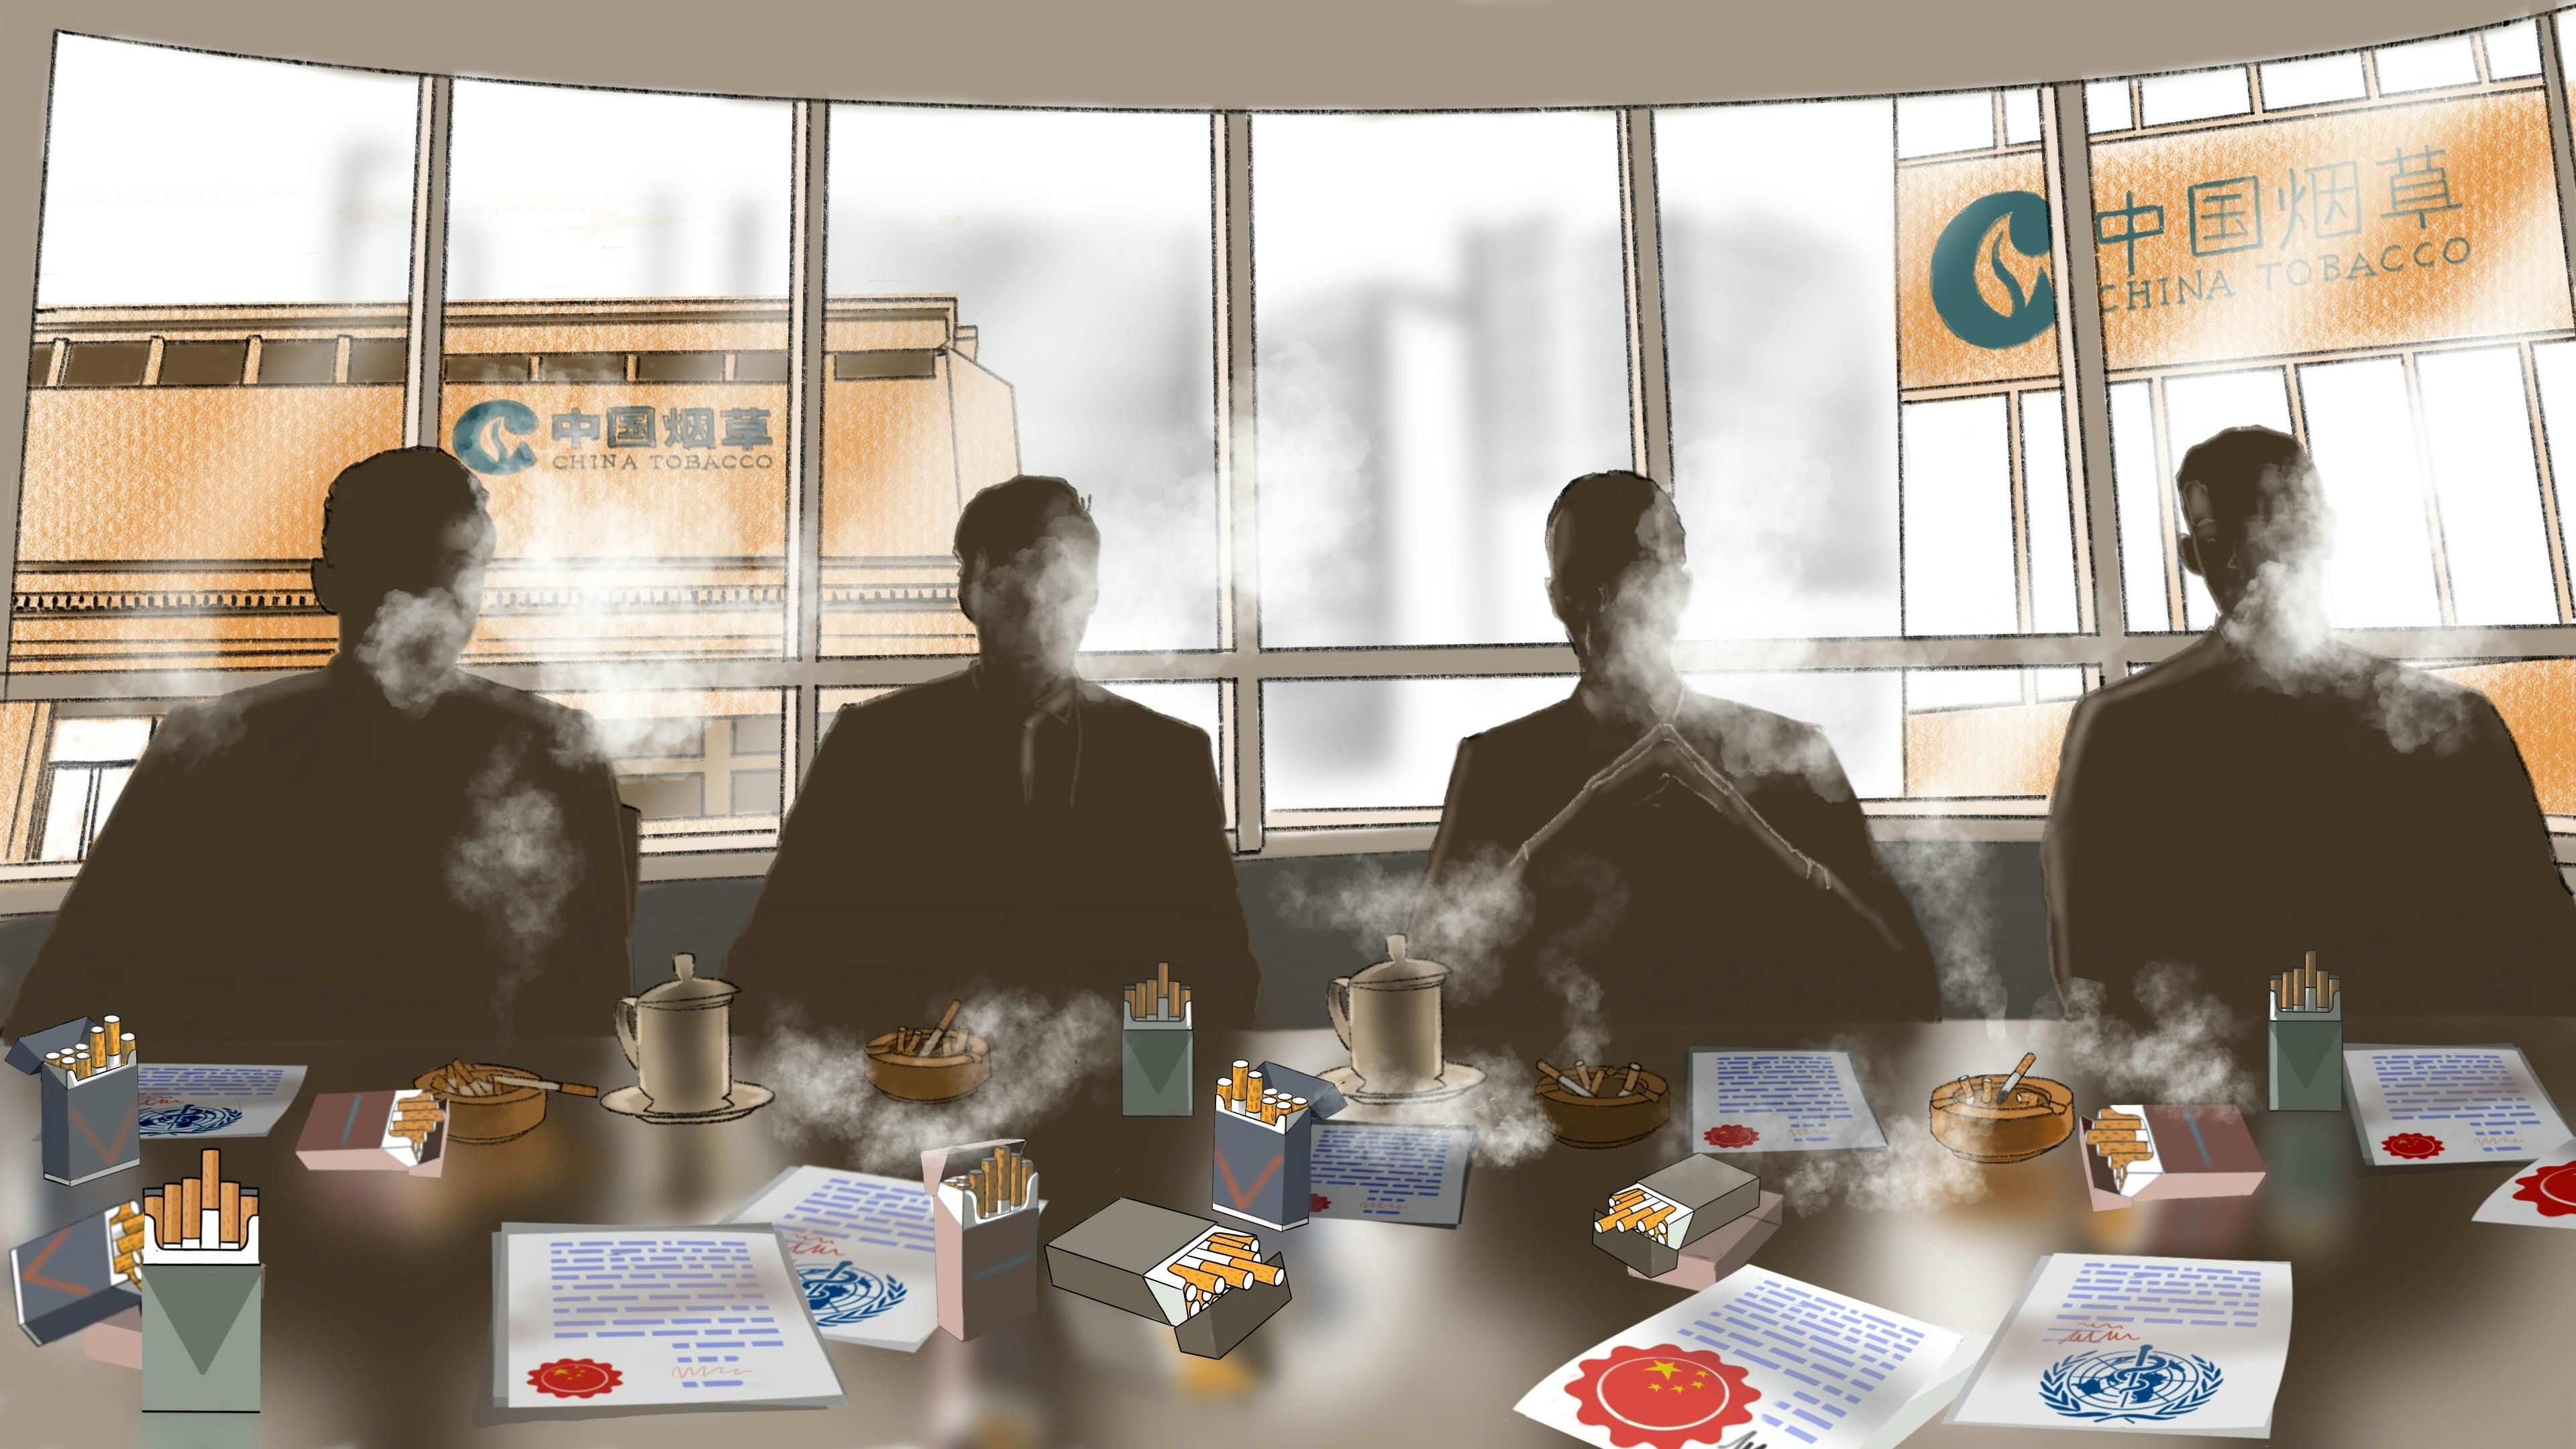 An illustration of four silhouetted figures in a smoky boardroom with packs of cigarettes and China Tobacco signs in the background.